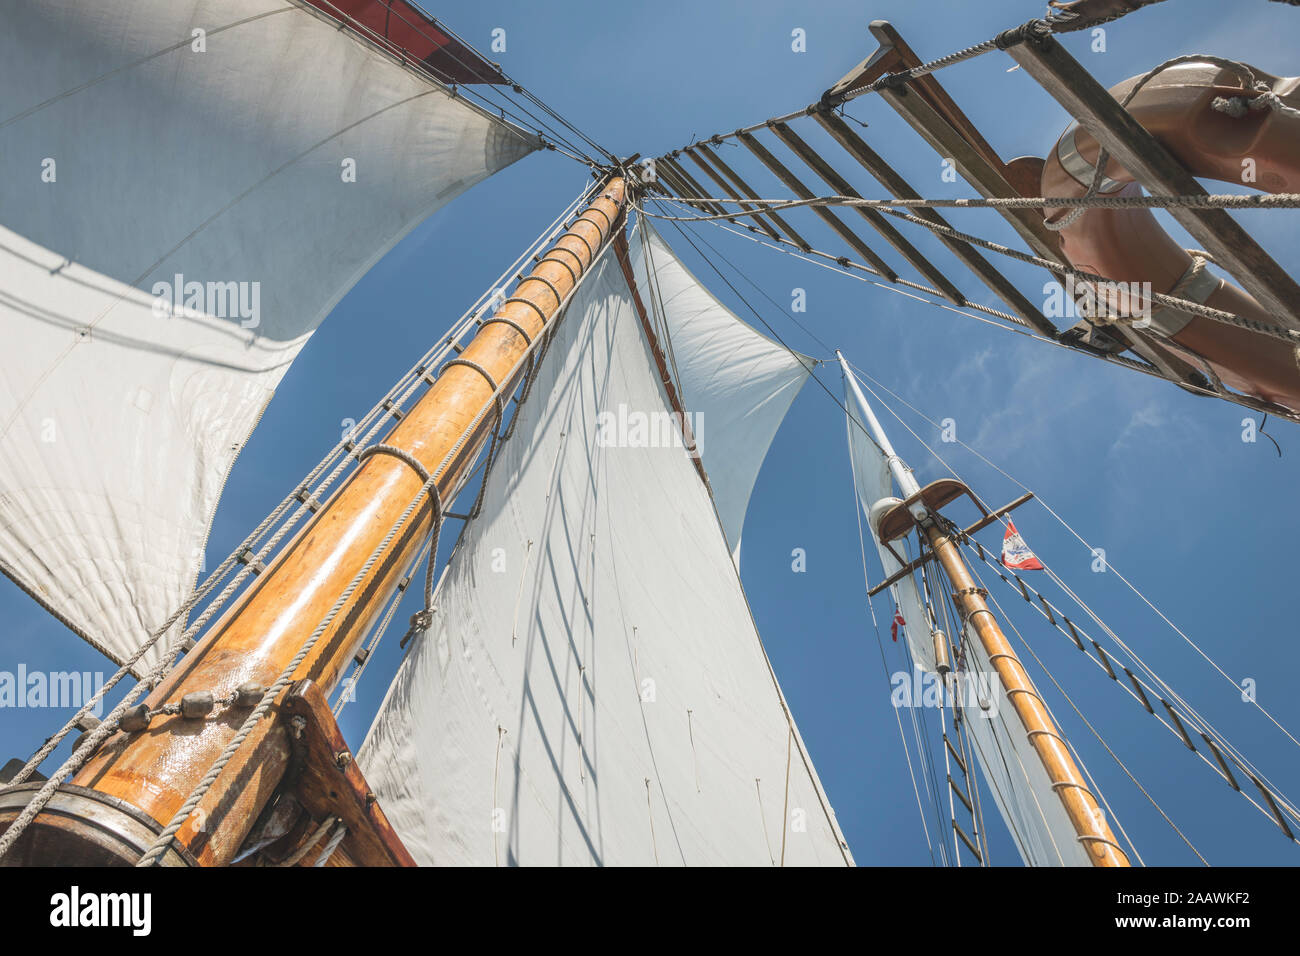 Denmark, Baltic Sea, Low angle view of gaff schooner sail Stock Photo